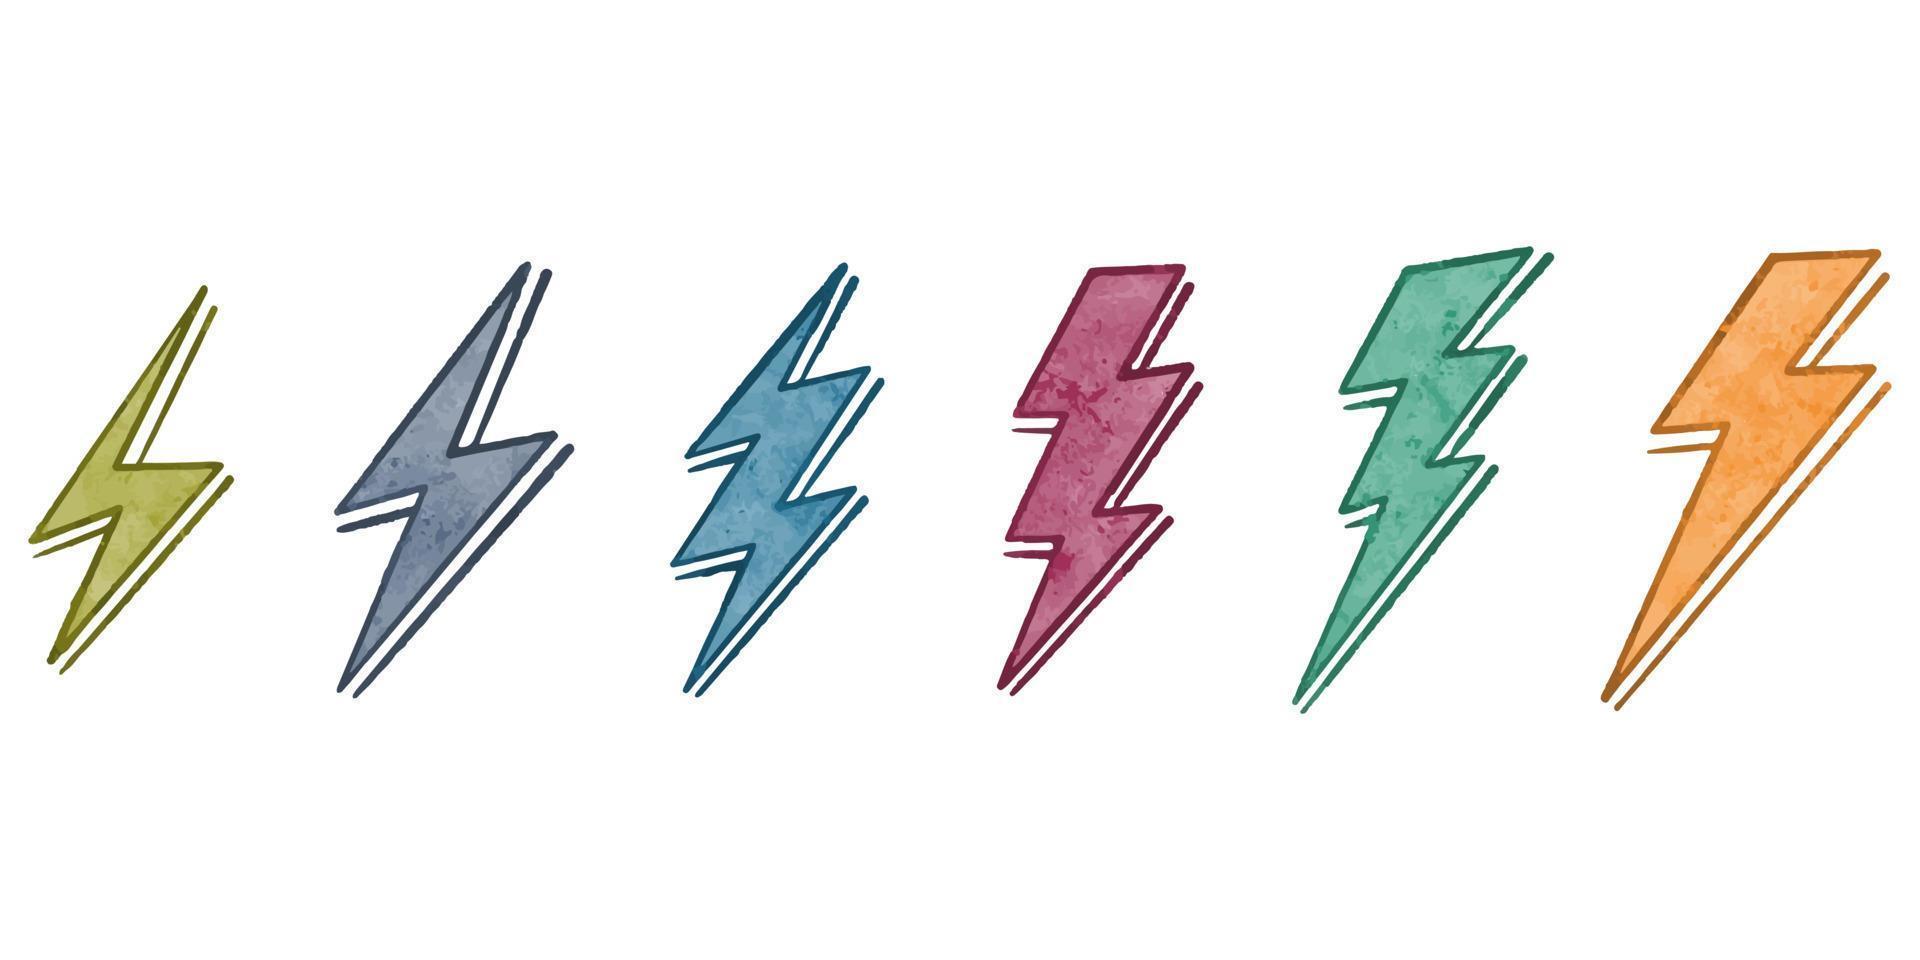 Watercolor hand drawn electric lightning bolt symbol. thunder symbol doodle icon .design element isolated on white background. vector illustration.